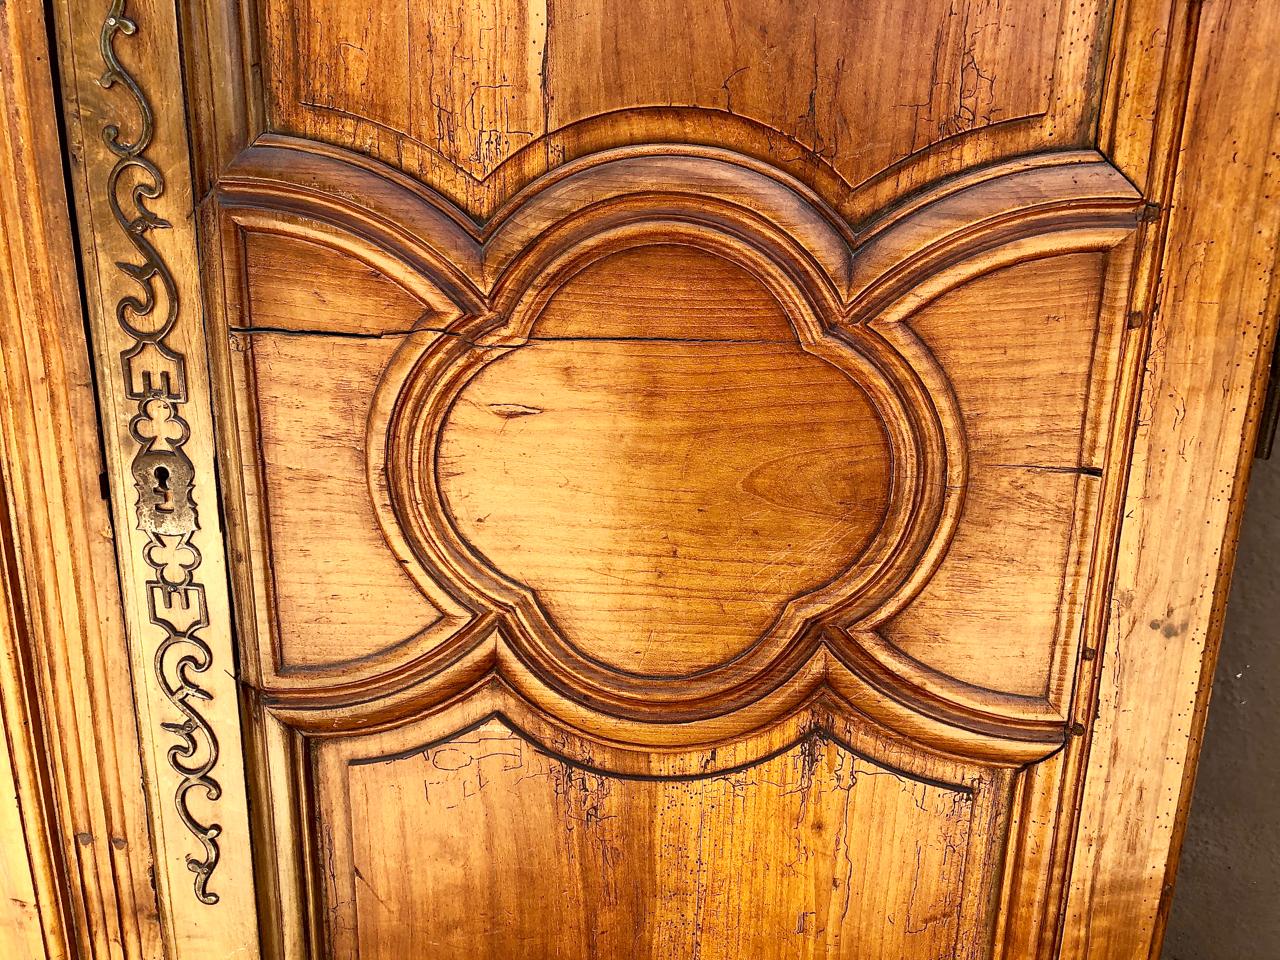 This is a great pair of unusually large French 18th century fruitwood armoire doors. The doors feature carved moldings and a carved centered quatrefoil reserve. They retain the original large brass lock plate. Both doors are in overall very good